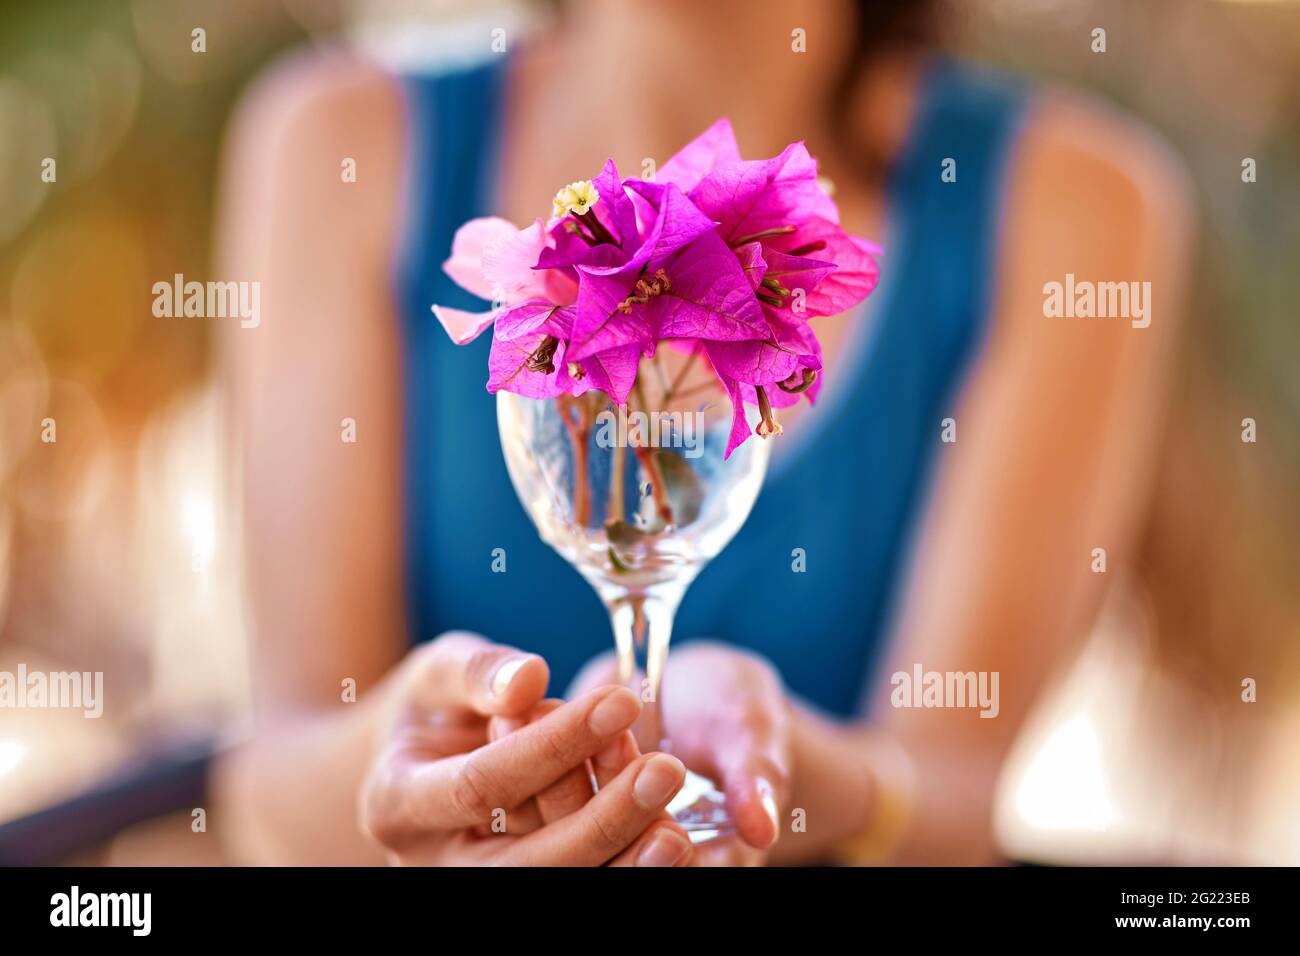 Woman holds bright pink flowers Bougainvillea in a glass of wine in front of herself. Advertising concept of travel and summer vacation. Summer surreal flowers creative trendy concept Stock Photo